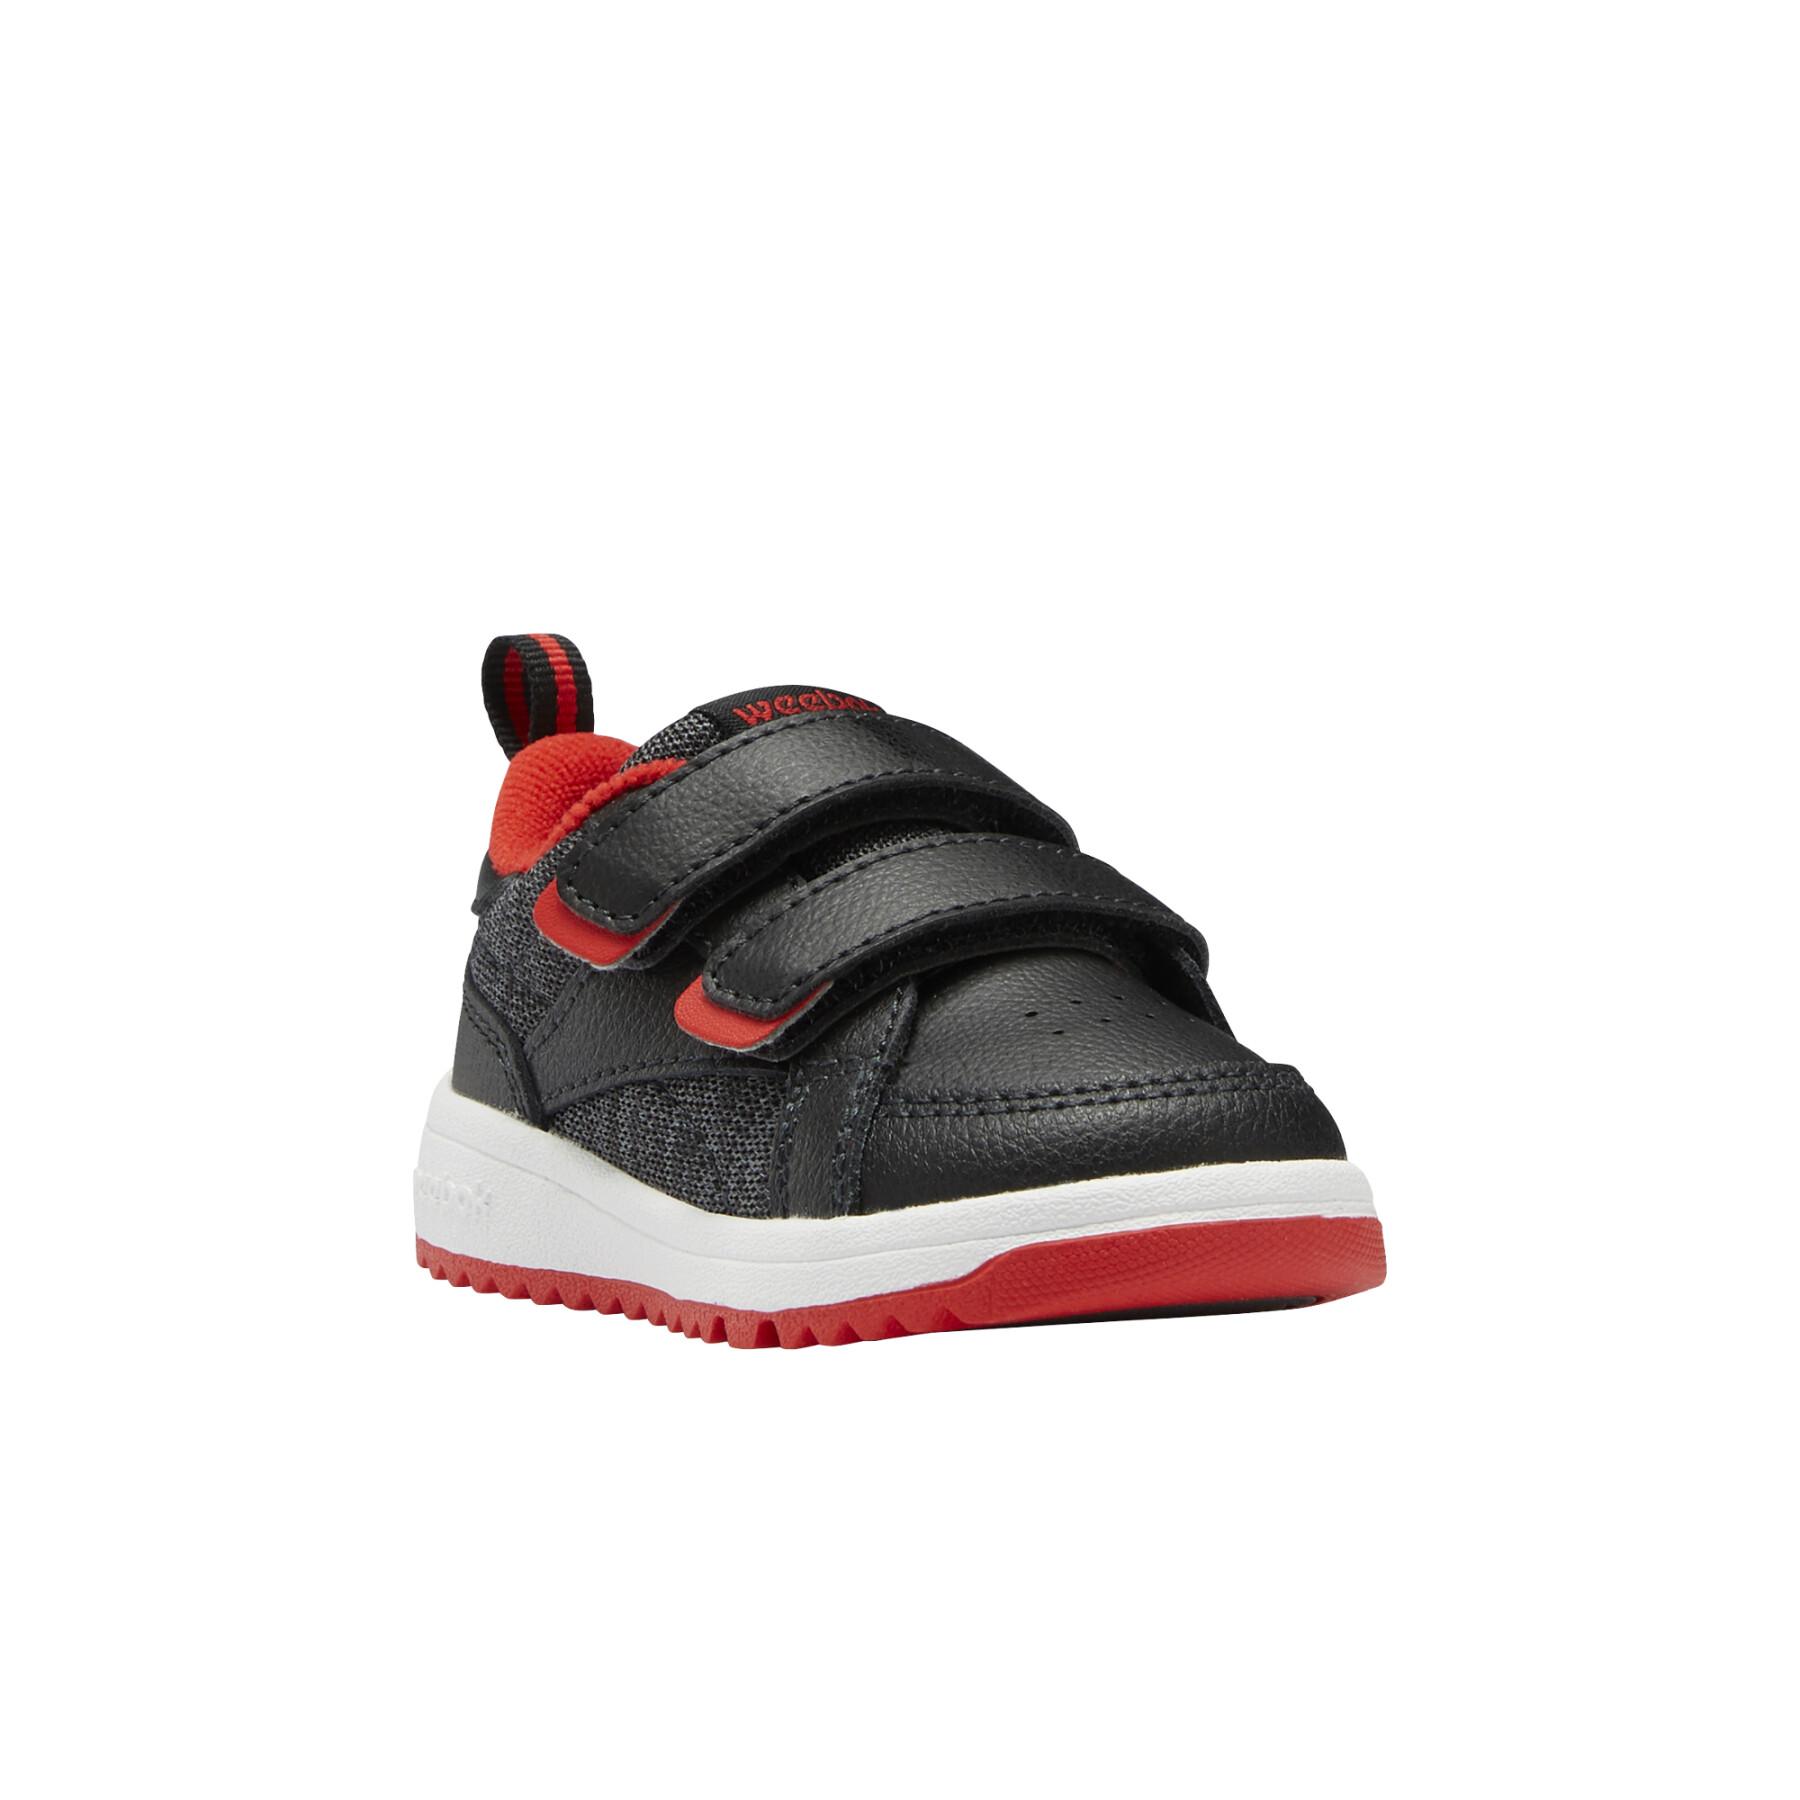 Baby shoes Reebok Weebok Clasp Low